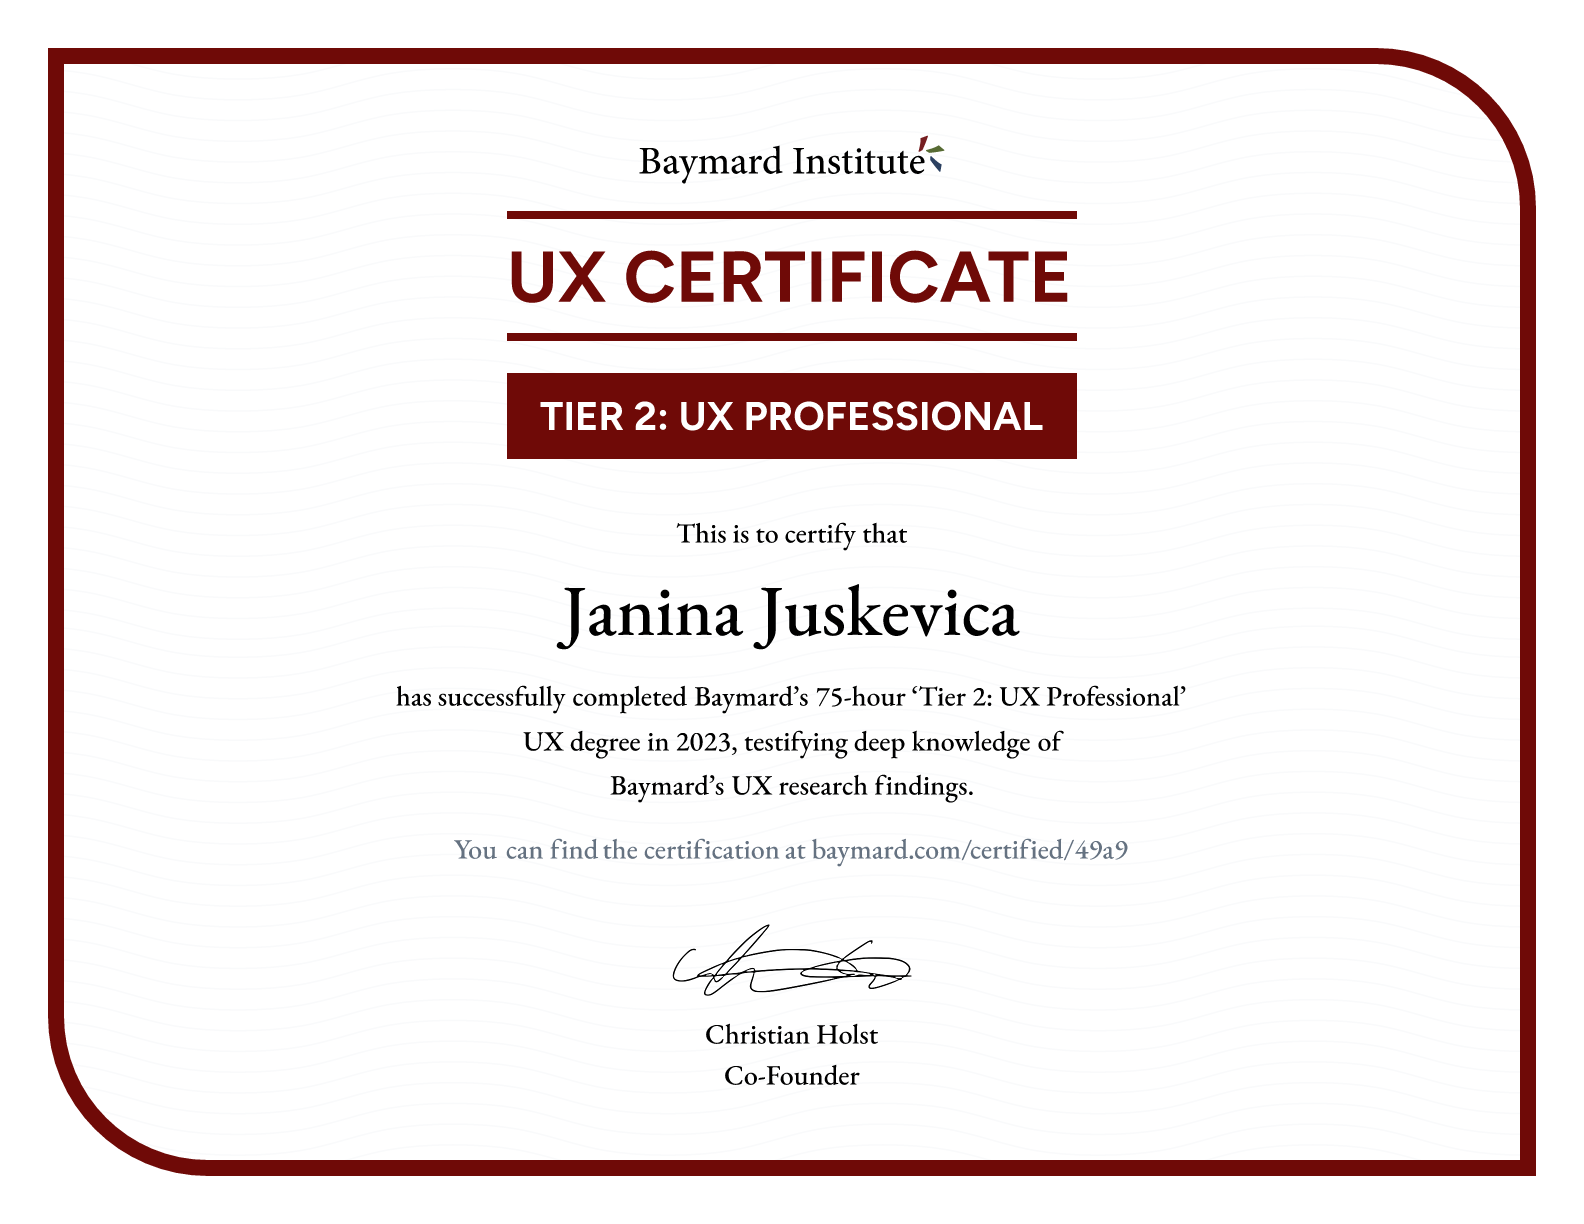 Janina Juskevica’s certificate